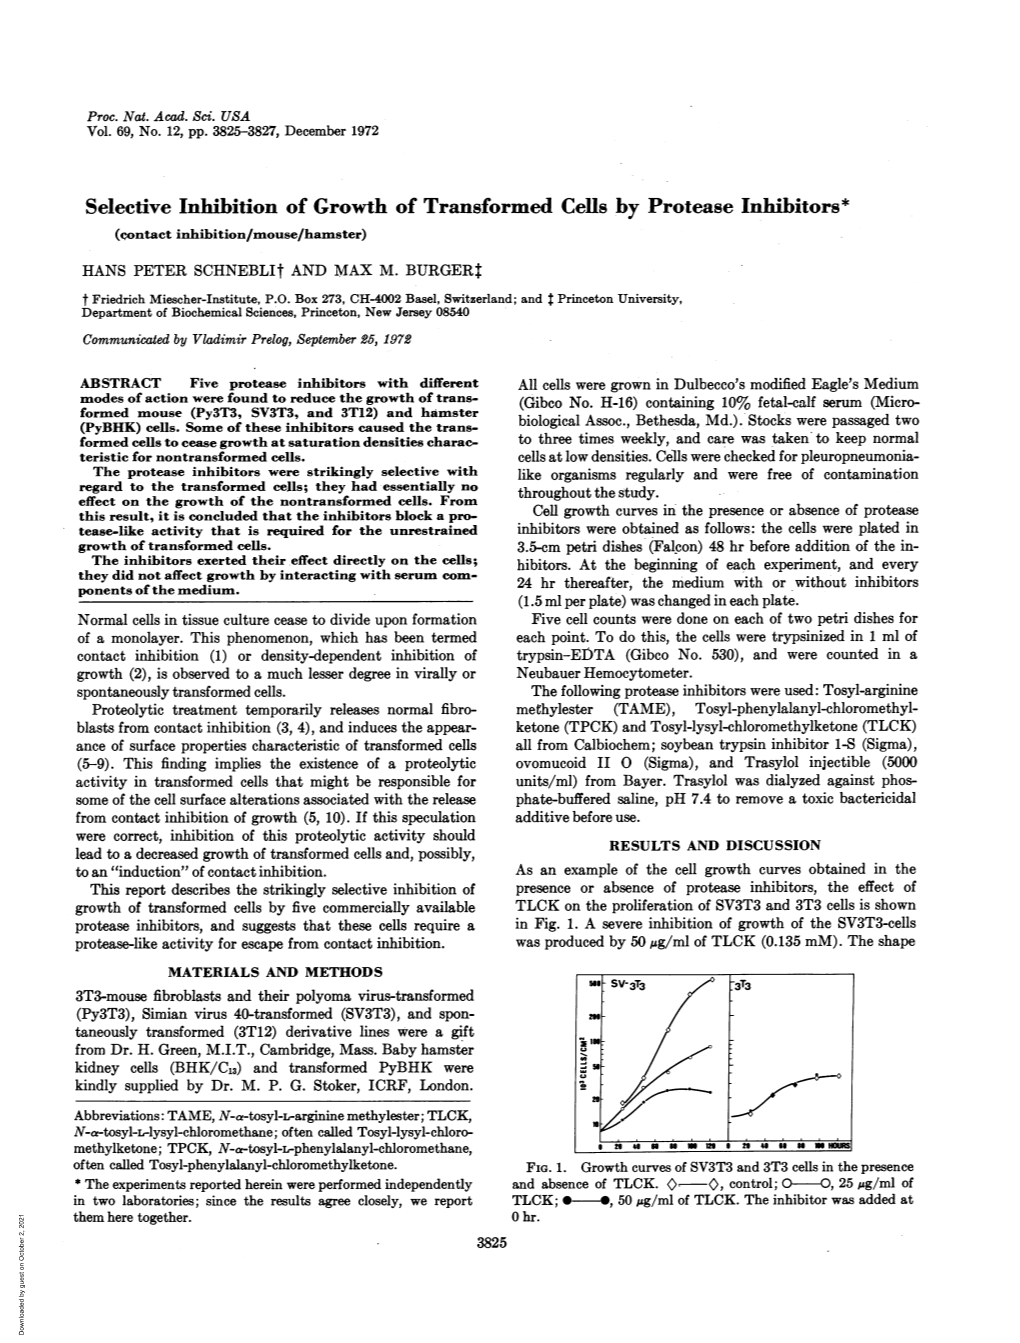 Selective Inhibition of Growth of Transformed Cells by Protease Inhibitors* (Contact Inhibition/Mouse/Hamster)